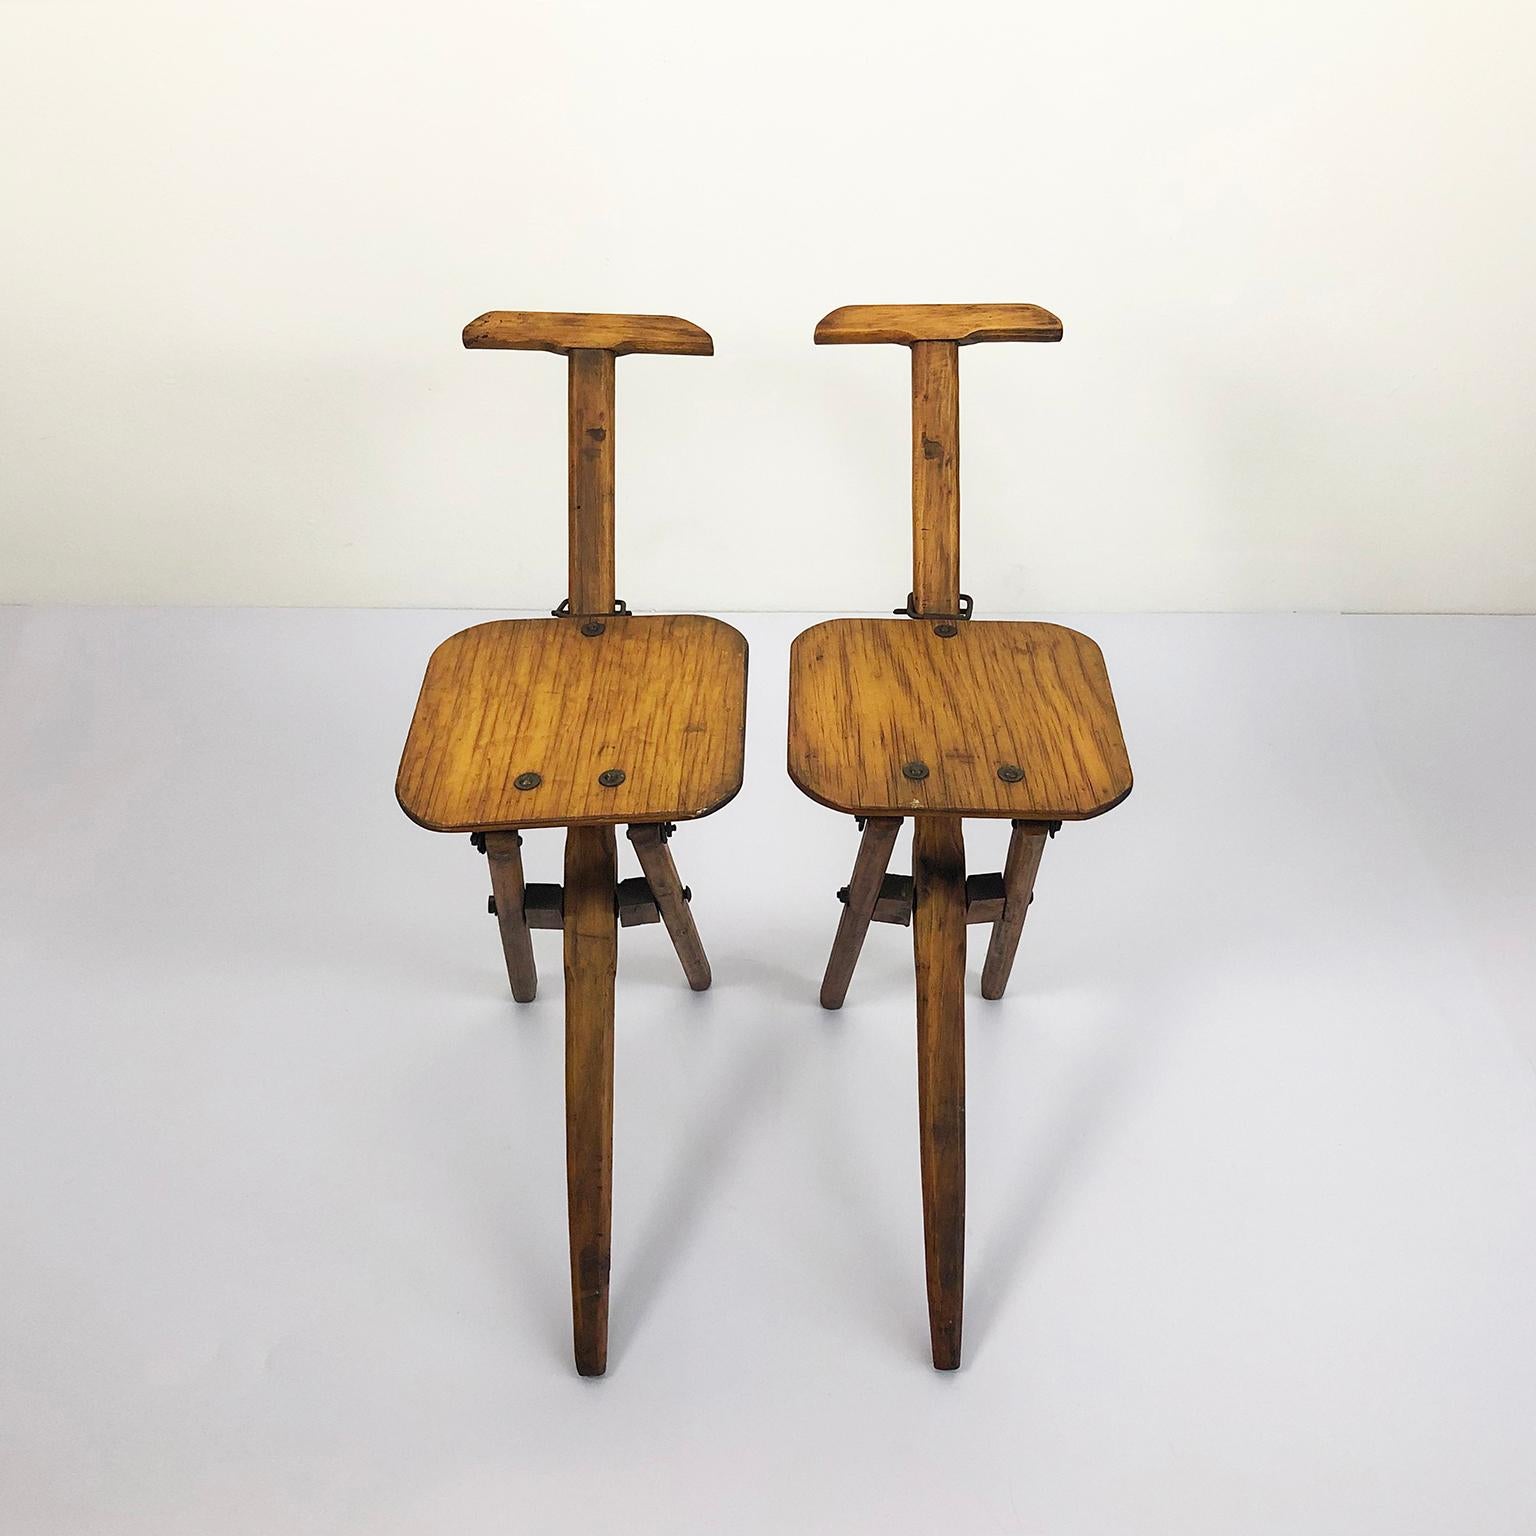 We offer this rare pair antique Mexican folding stool made in ponderosa Chihuahua circa 1920, with fantastic design. Now not strong enough for seating but good as a clothes-horse in a bedroom or bathroom.